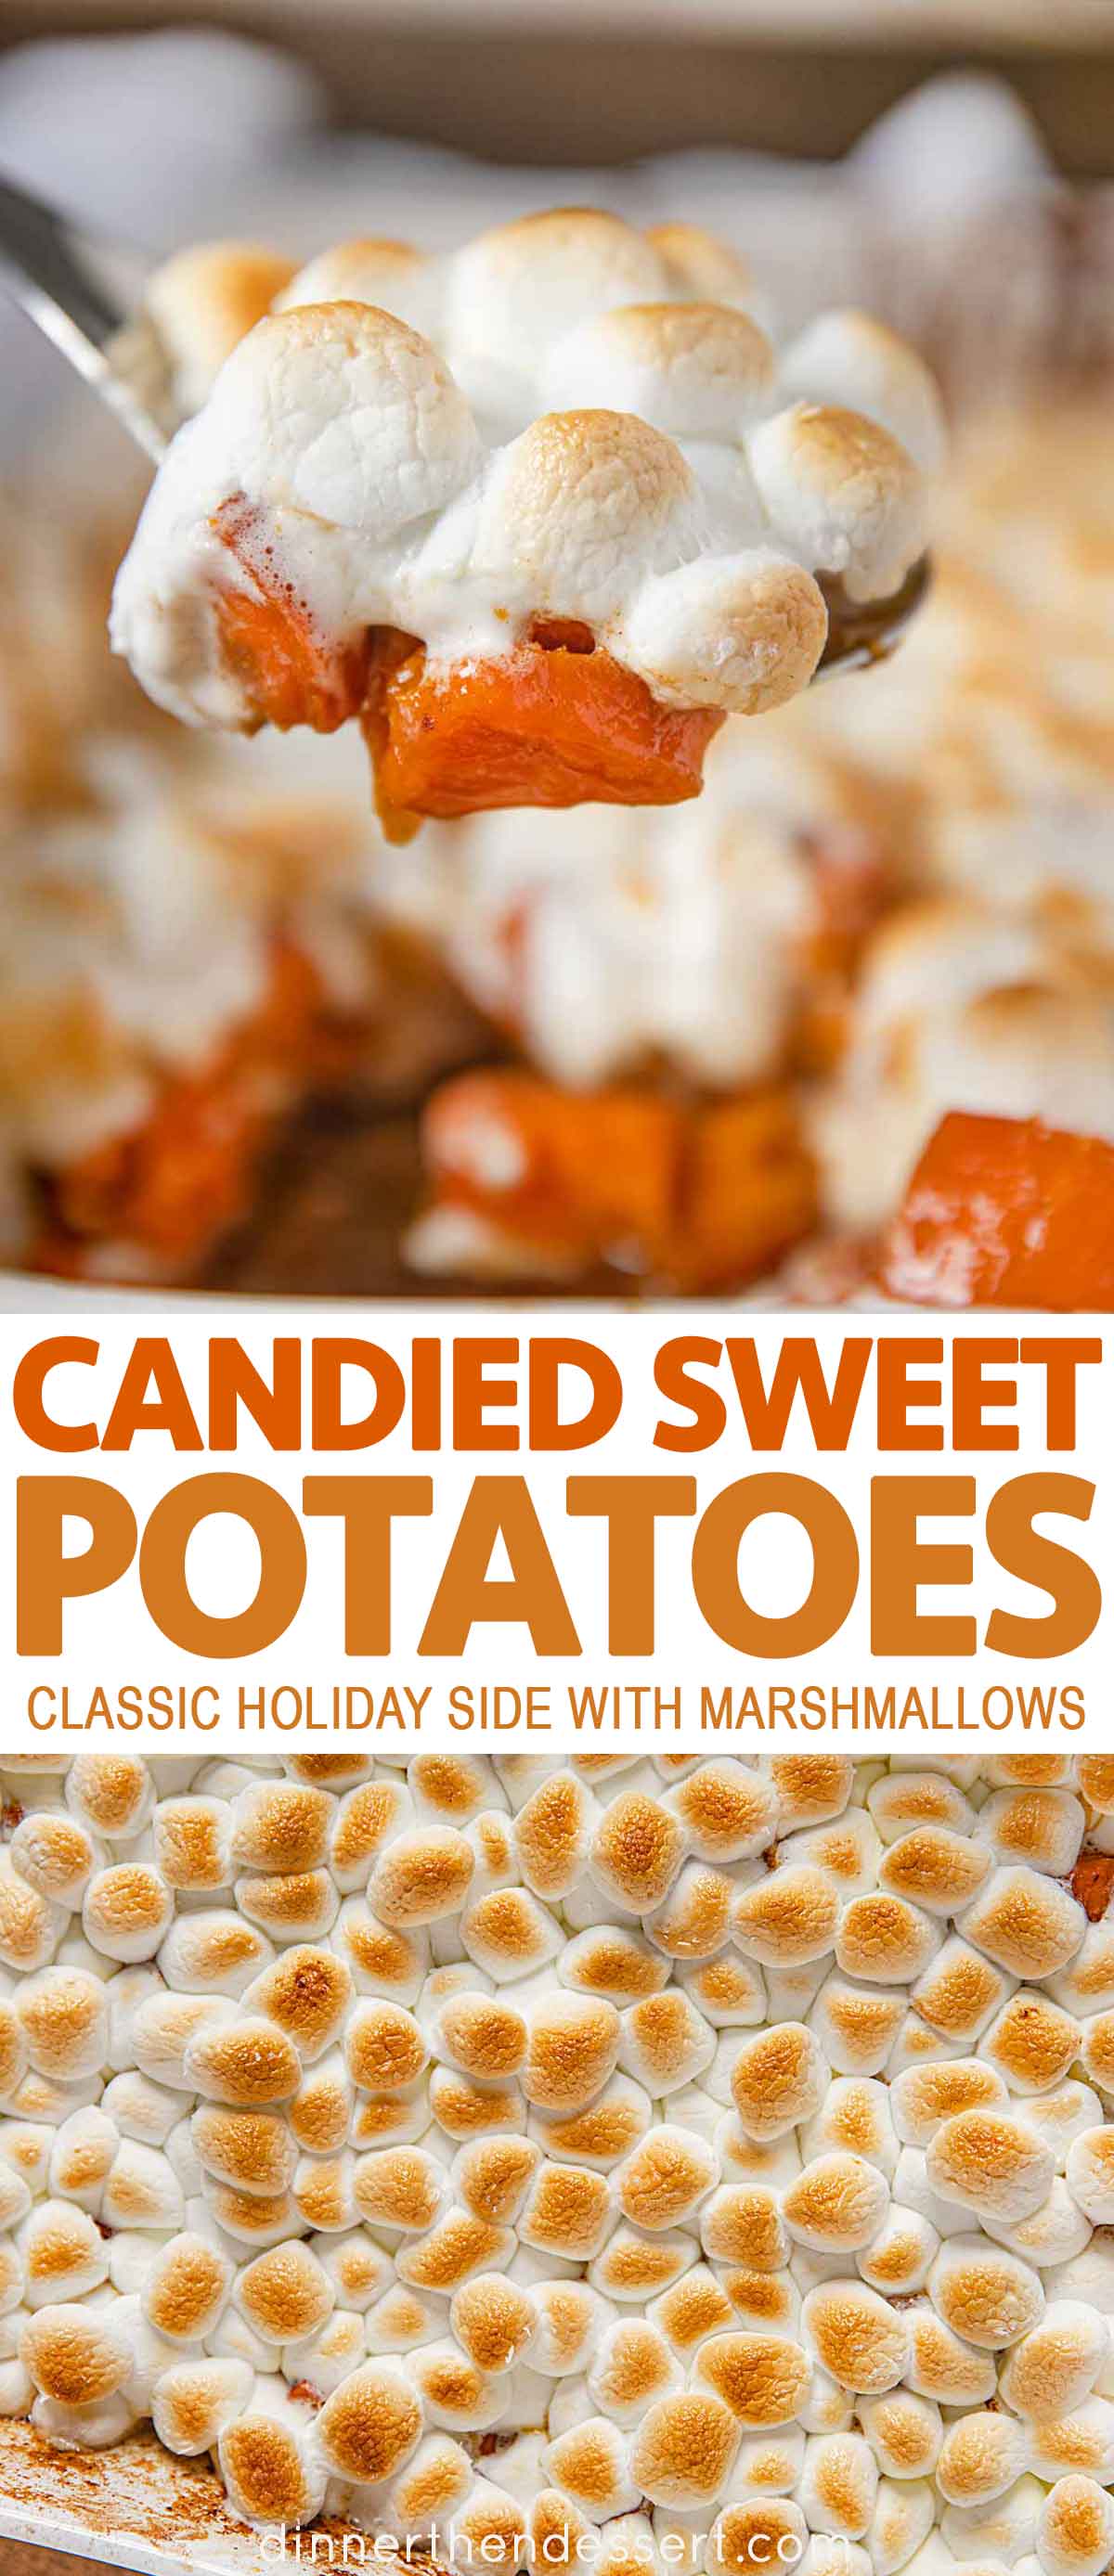 Mashed Sweet Potatoes with Marshmallows Recipe